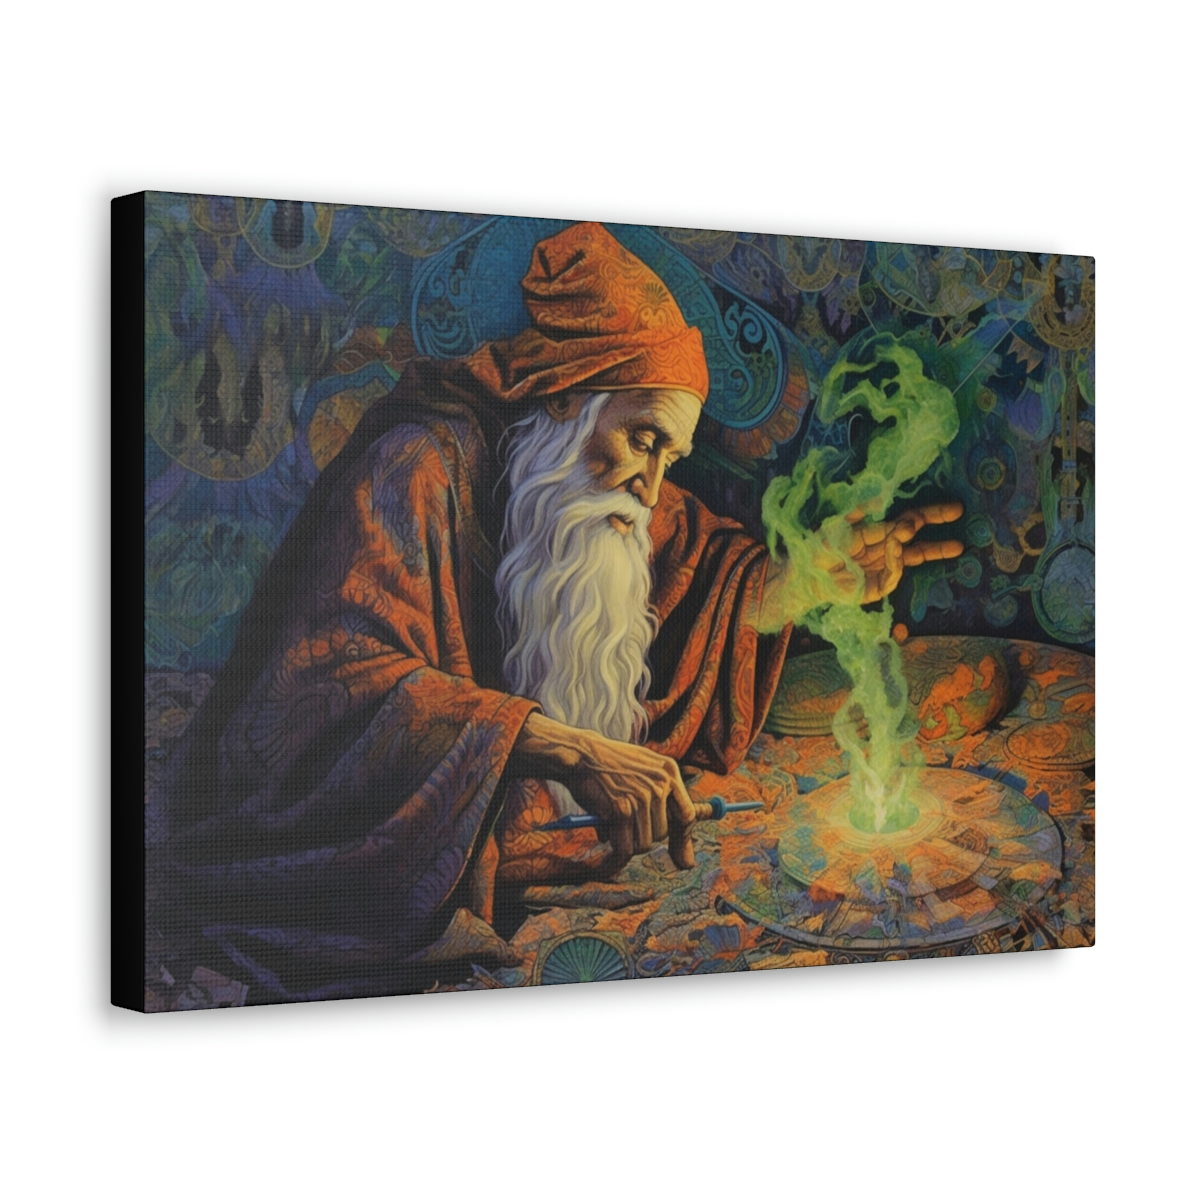 DMT Art Canvas Print: The Will Of Man